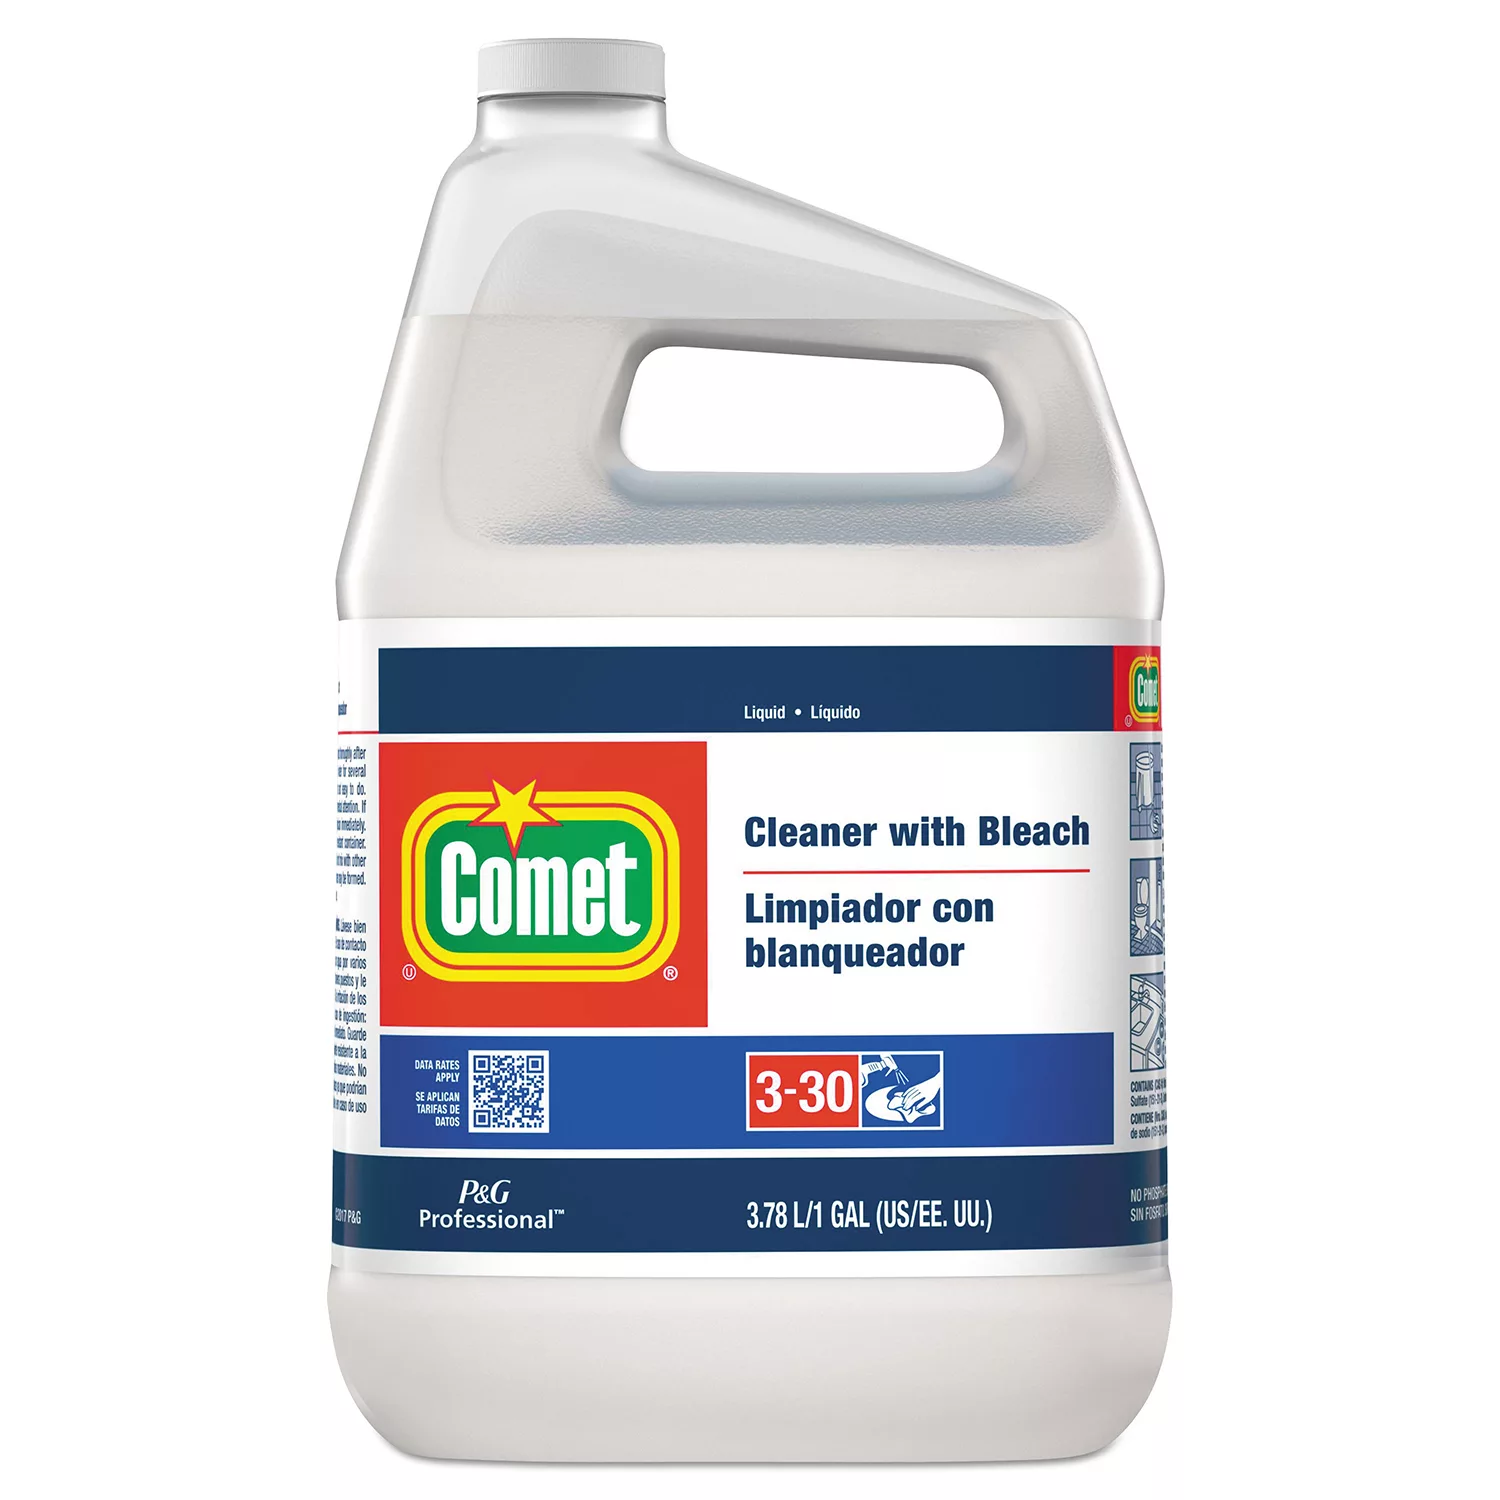 Comet Liquid Cleaner with Bleach (1 gal.)